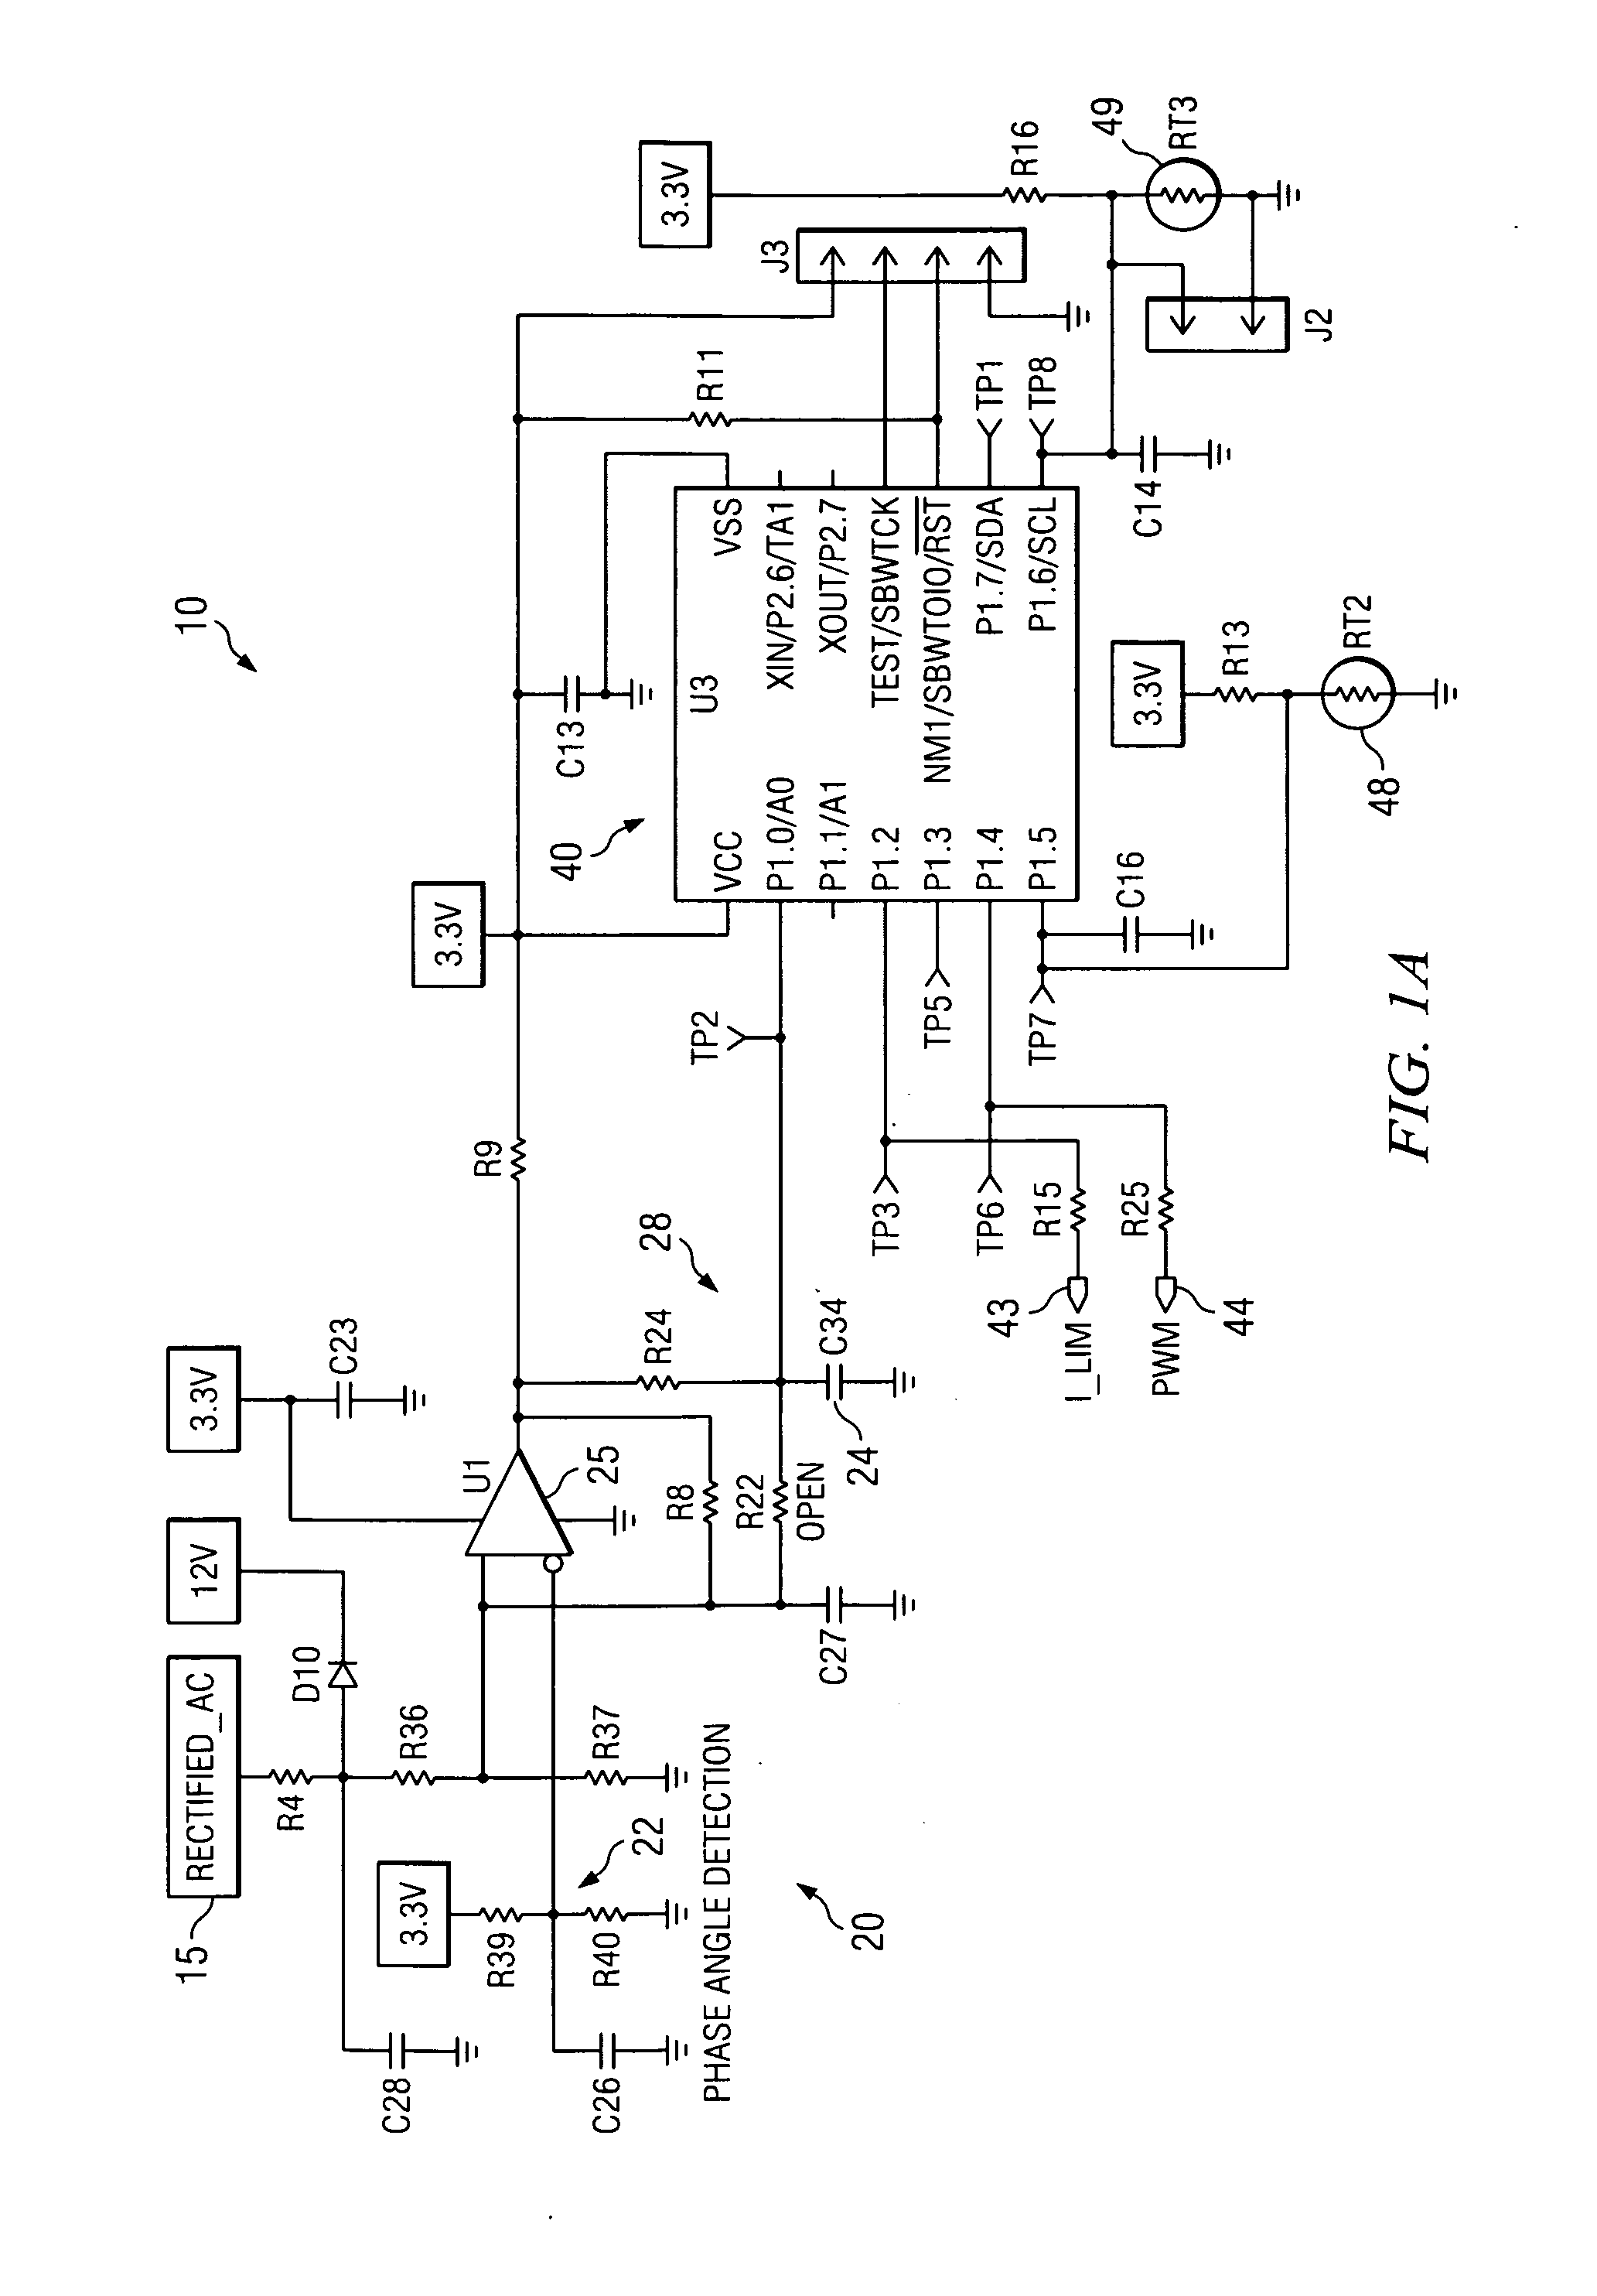 AC-powered, microprocessor-based, dimming LED power supply